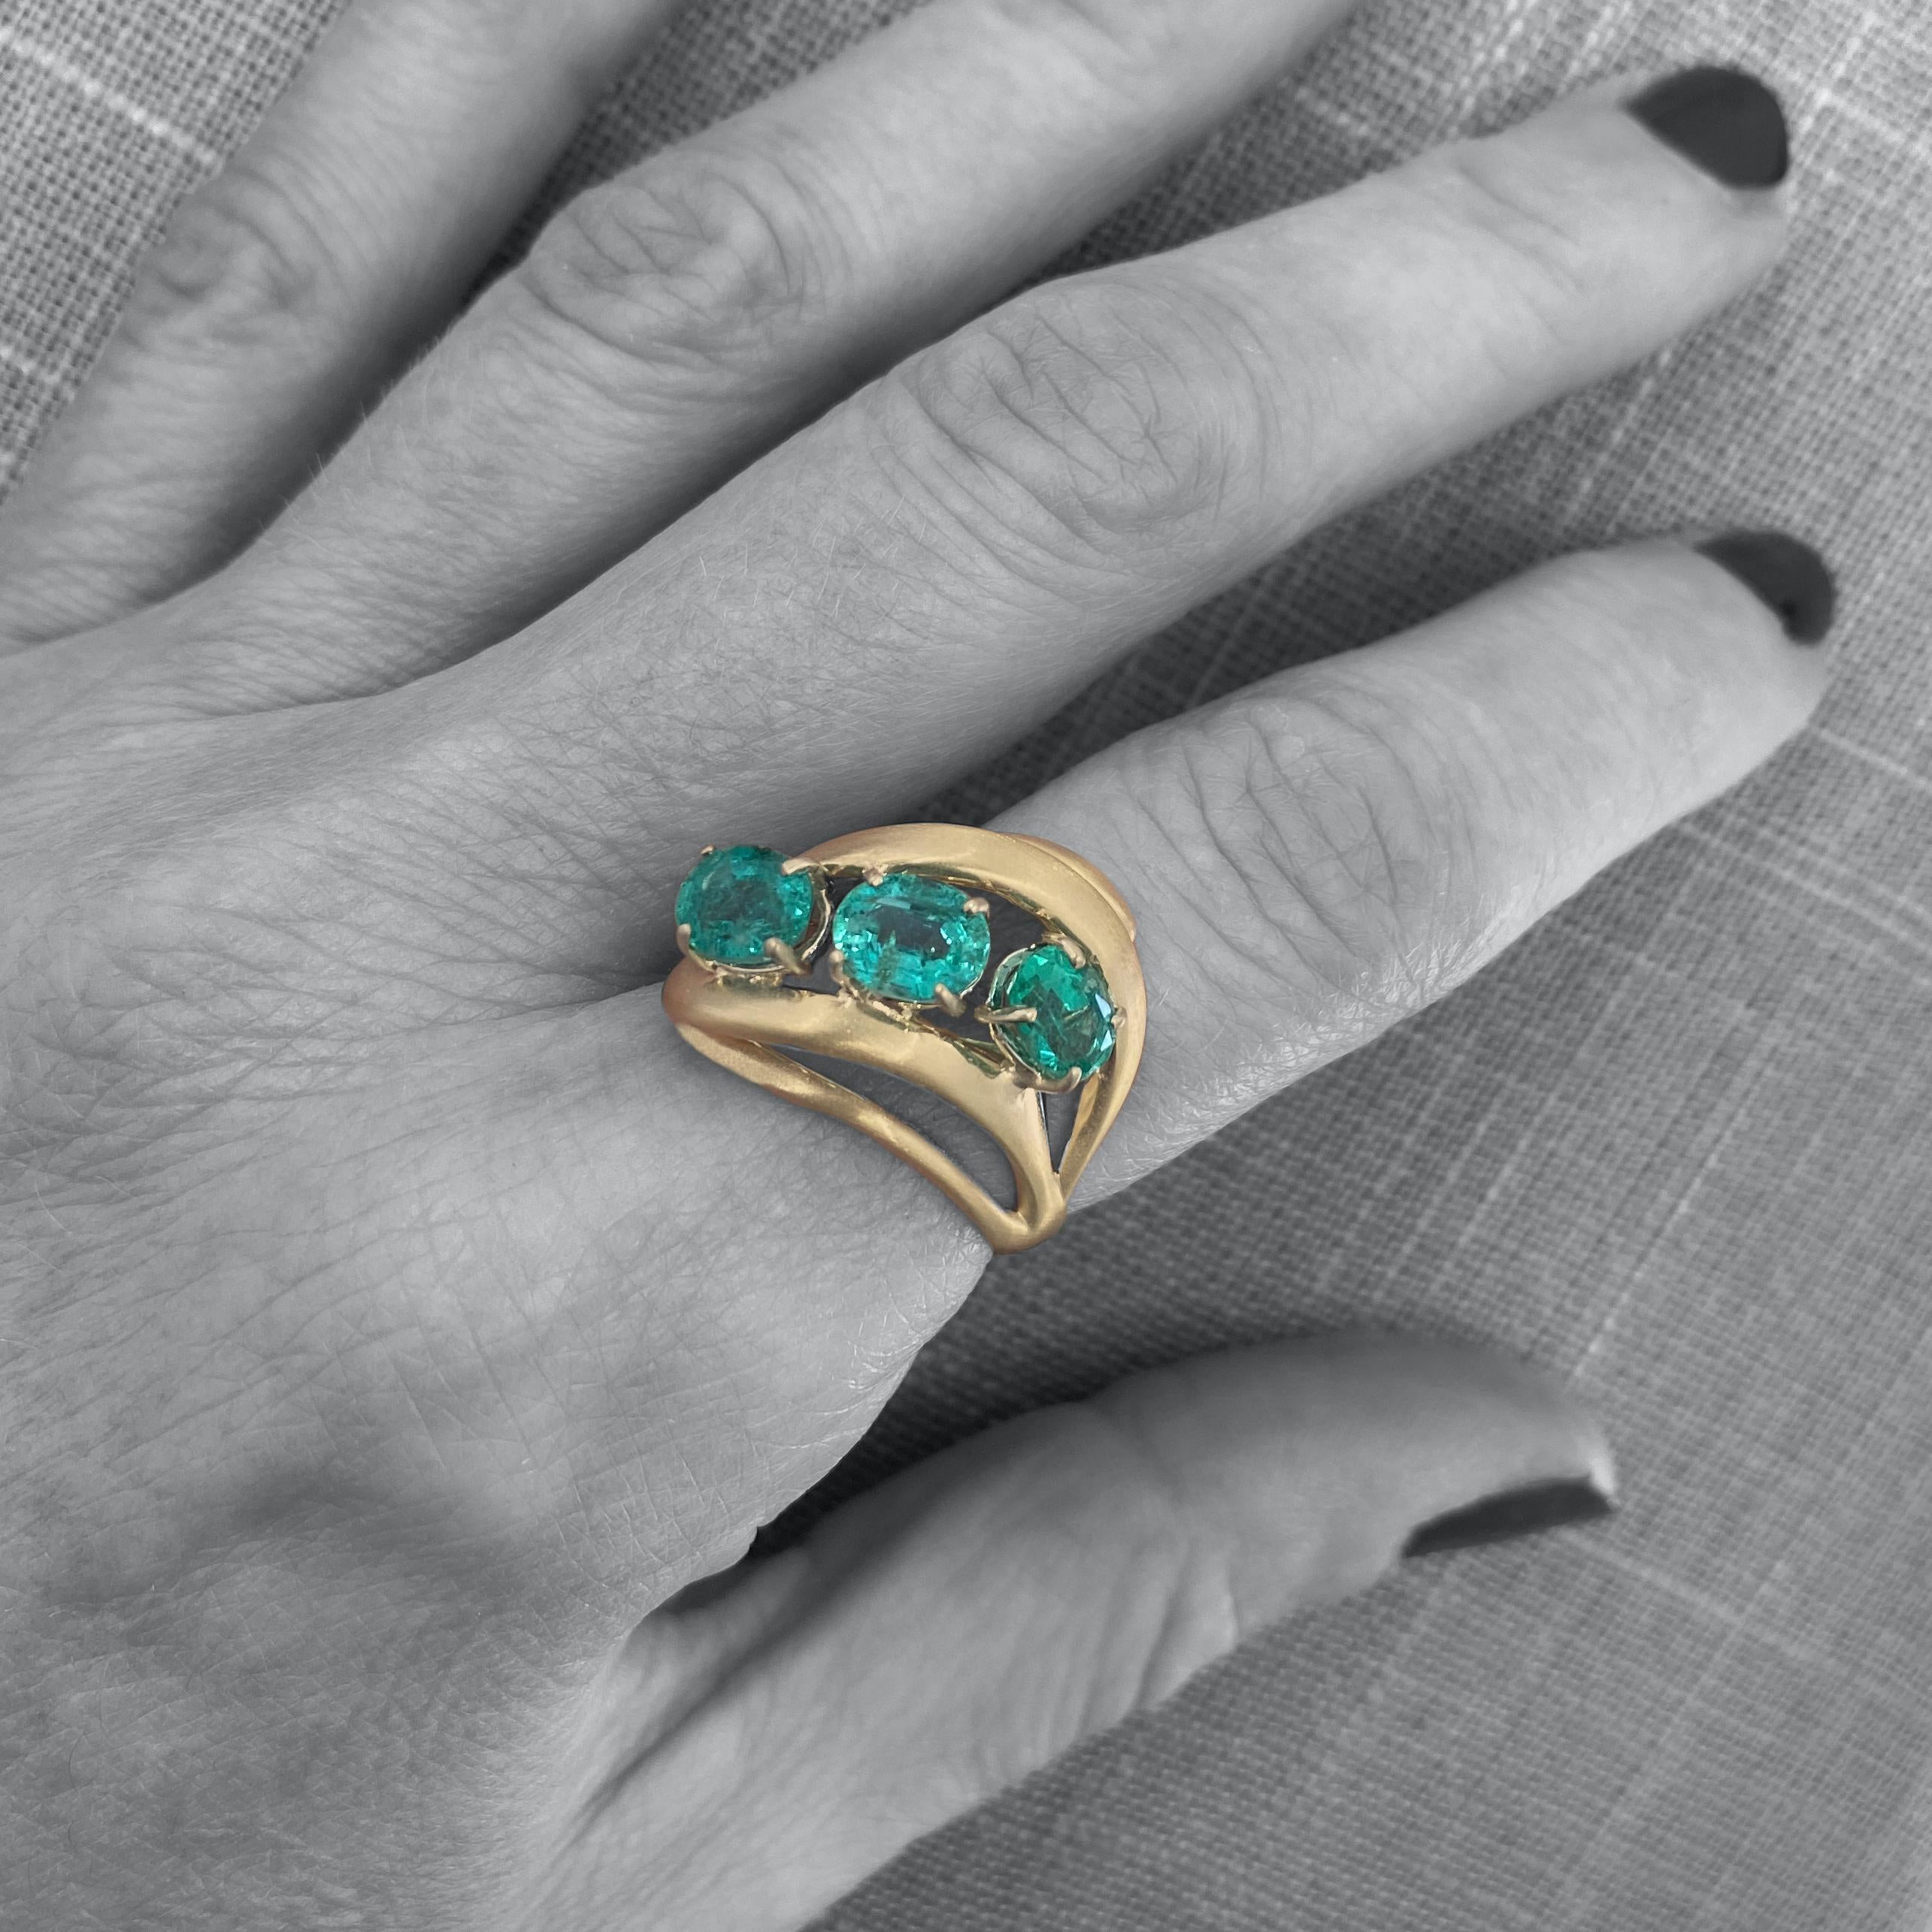 Contemporary Modern Cocktail Ring Featuring Three Oval Emeralds in Yellow Gold, Circa 1970 For Sale